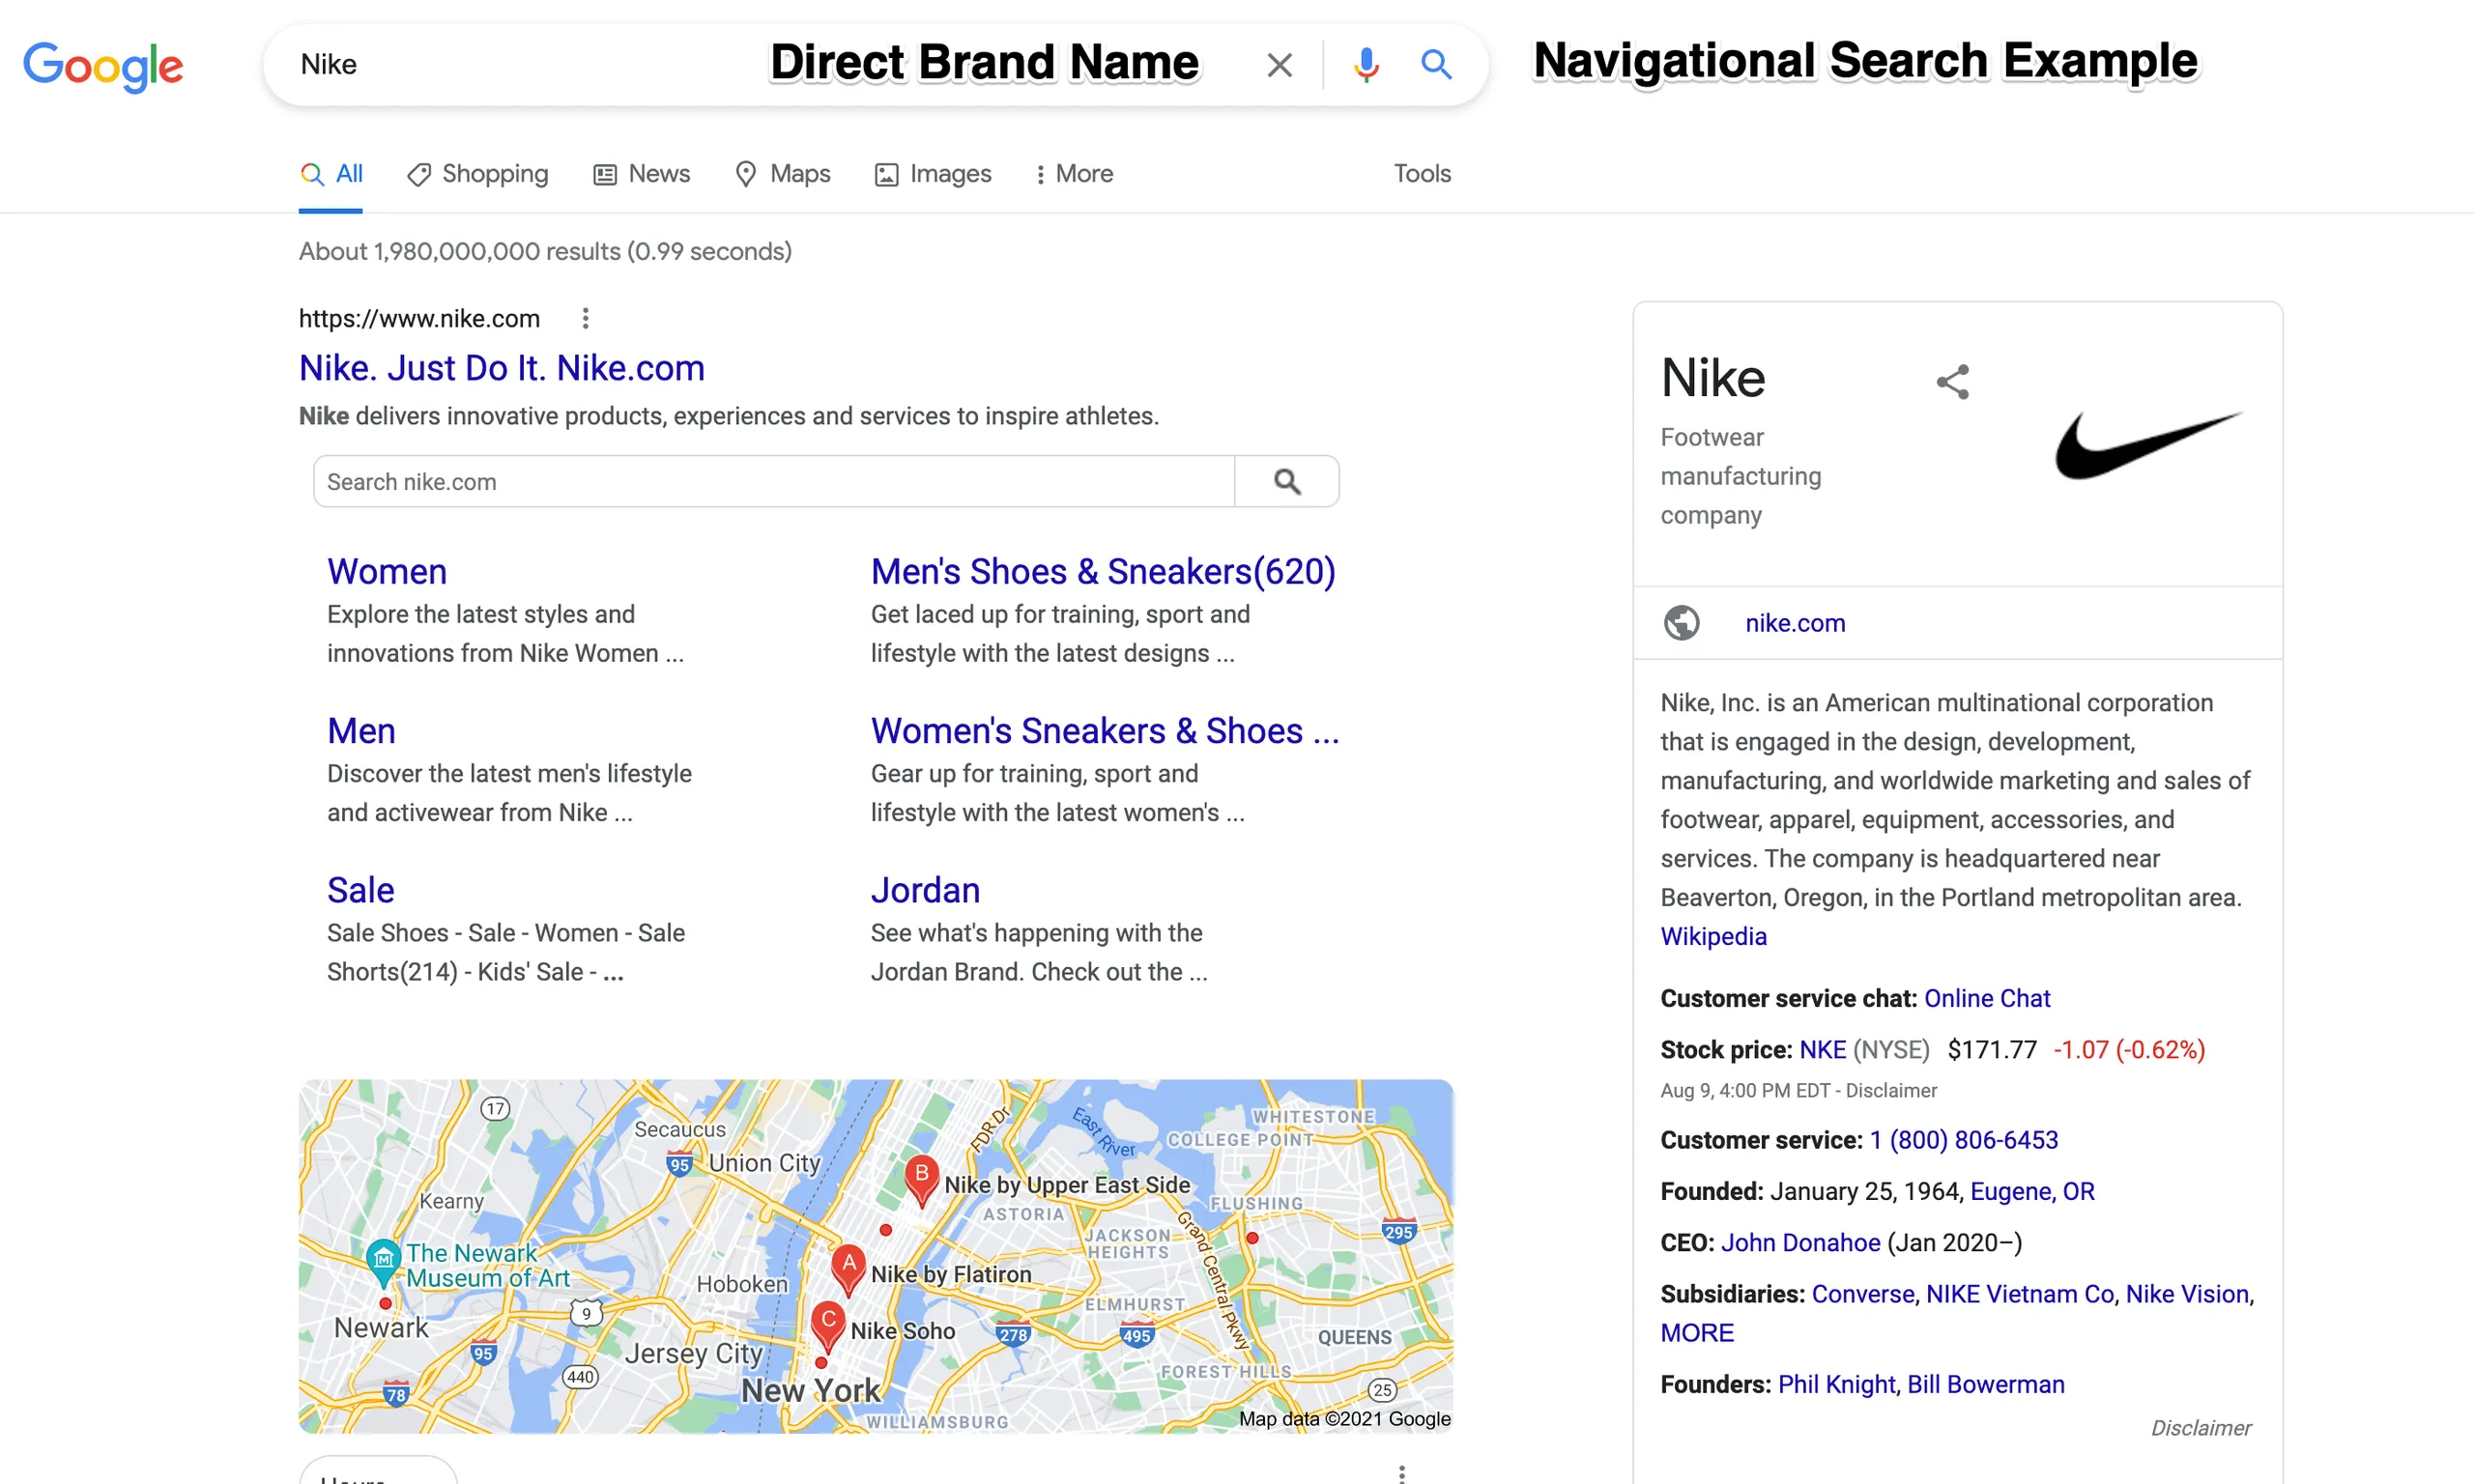 Example of a navigational search query